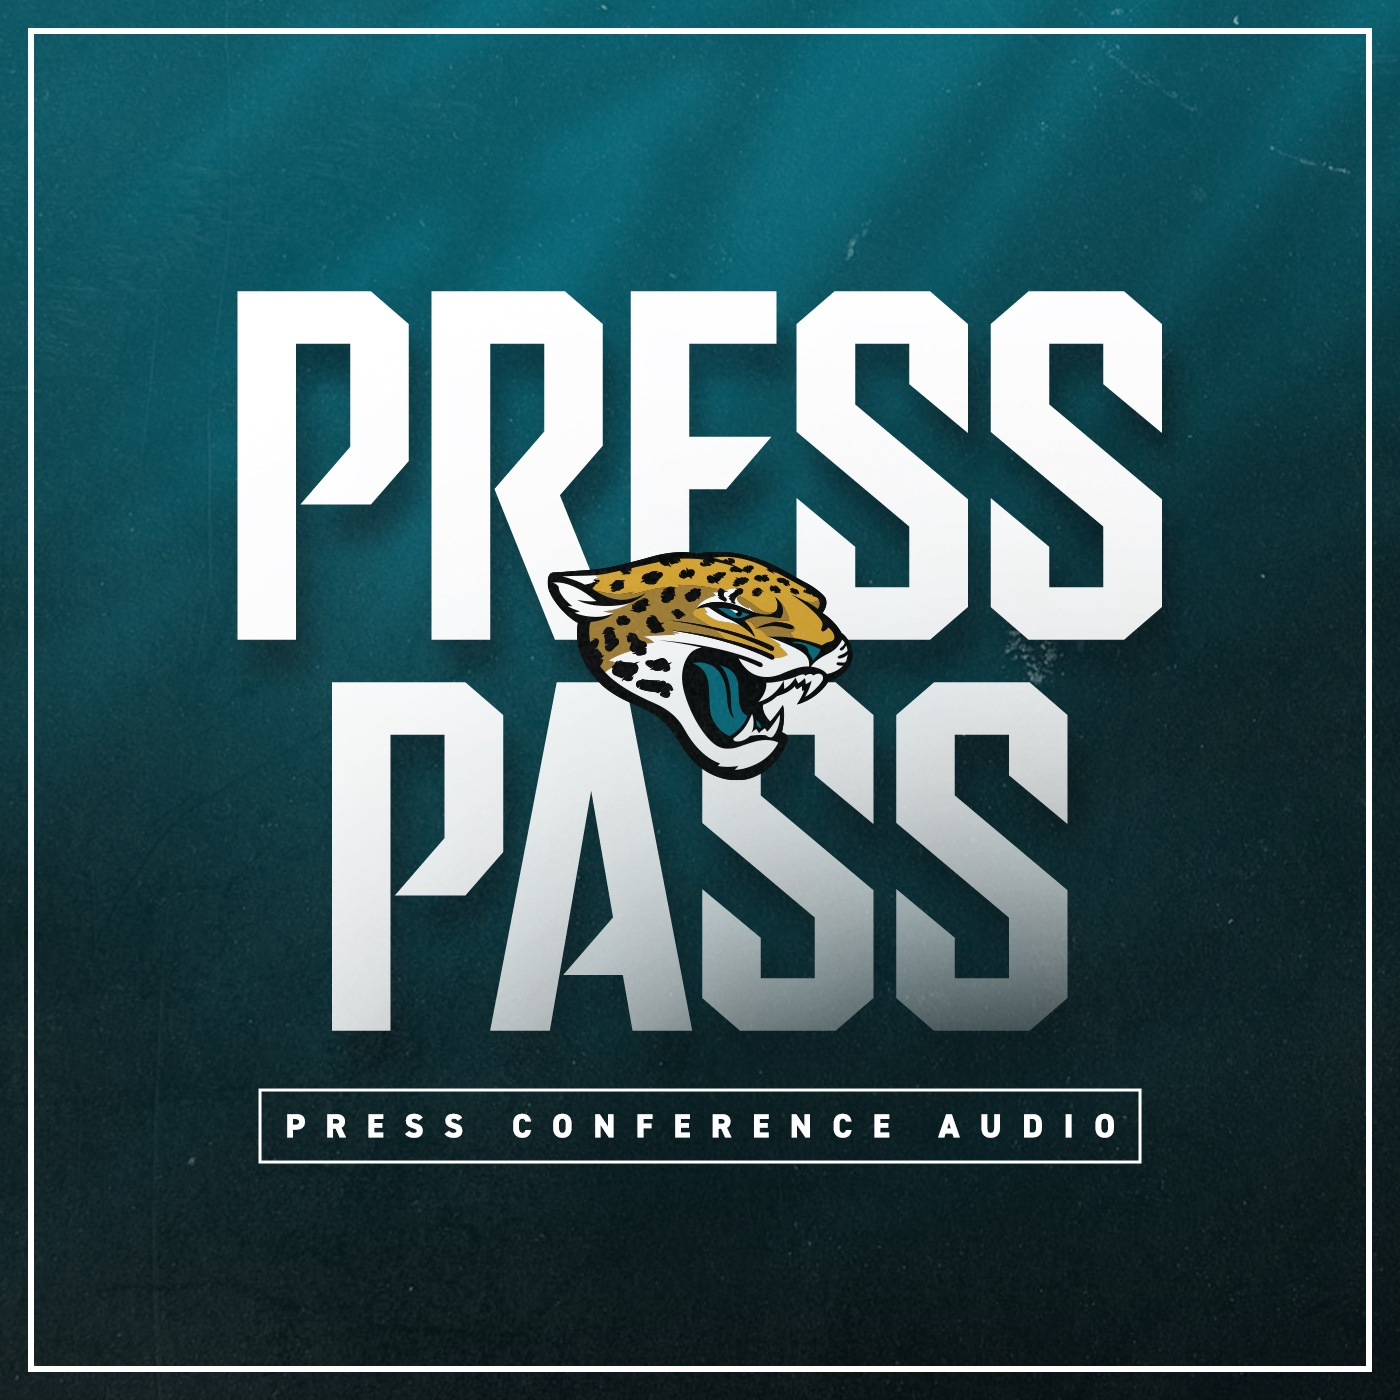 Press Pass | Mike Caldwell: "Prepare for the unknown"